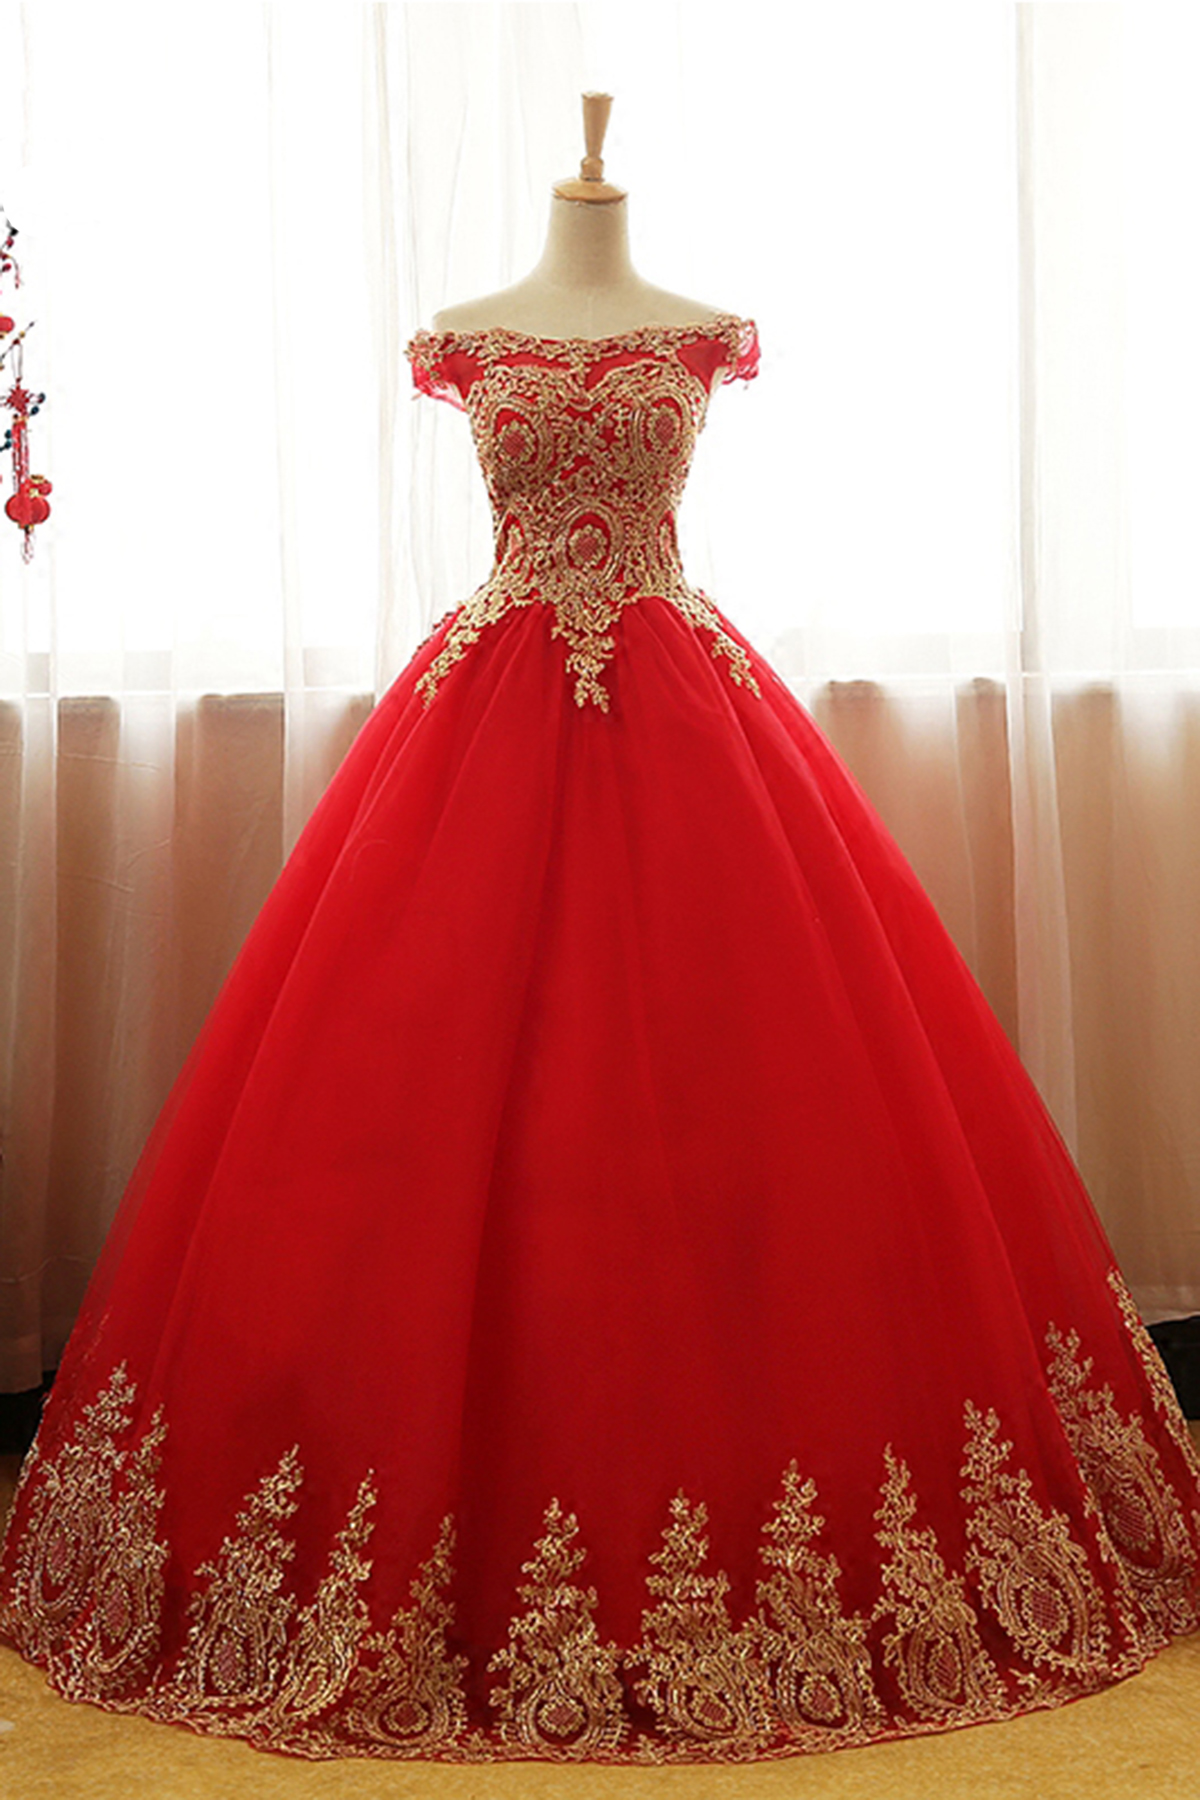 Sexy Custom Made Red Tulle A Line Prom Dresses With Gold Lace Appliqued Wedding Party Gowns ,formal Quinceanera Dress